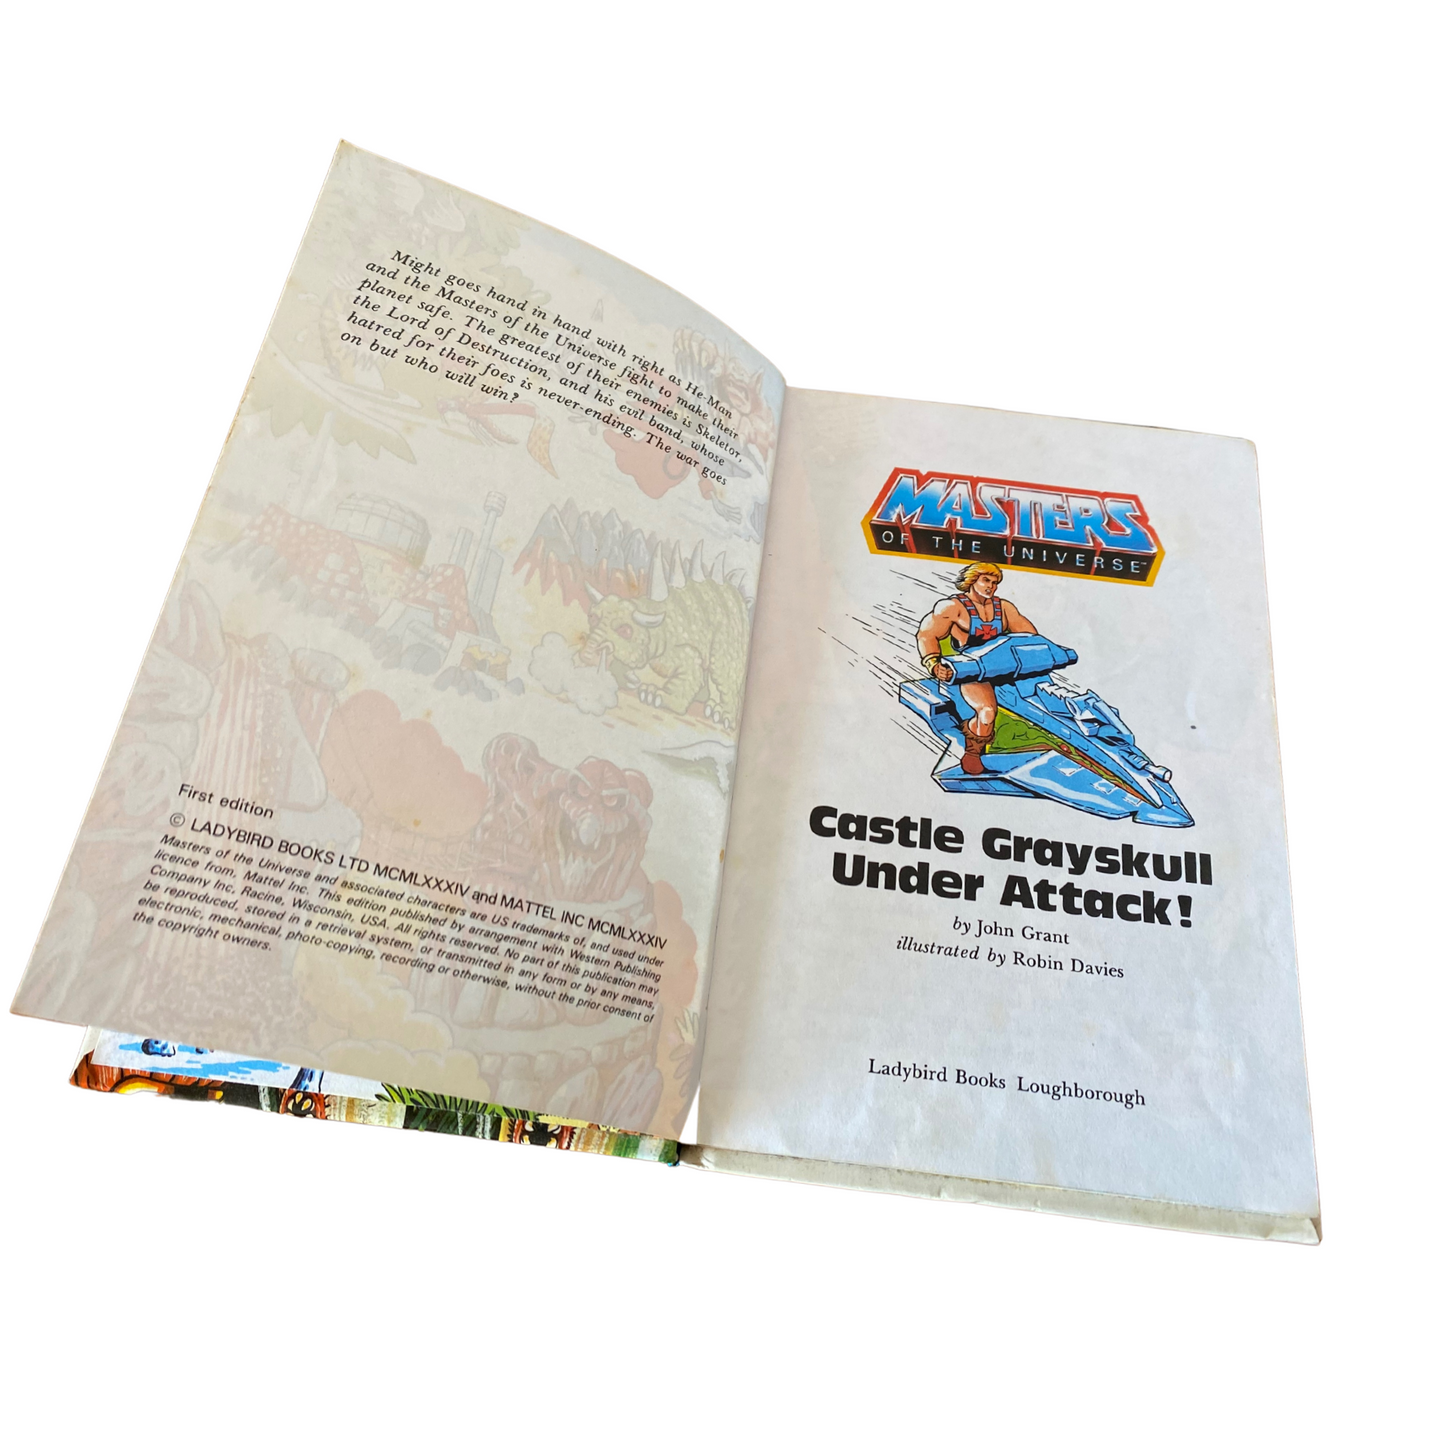 Small hardback book with glossy cover - He-Man Masters of the Universe